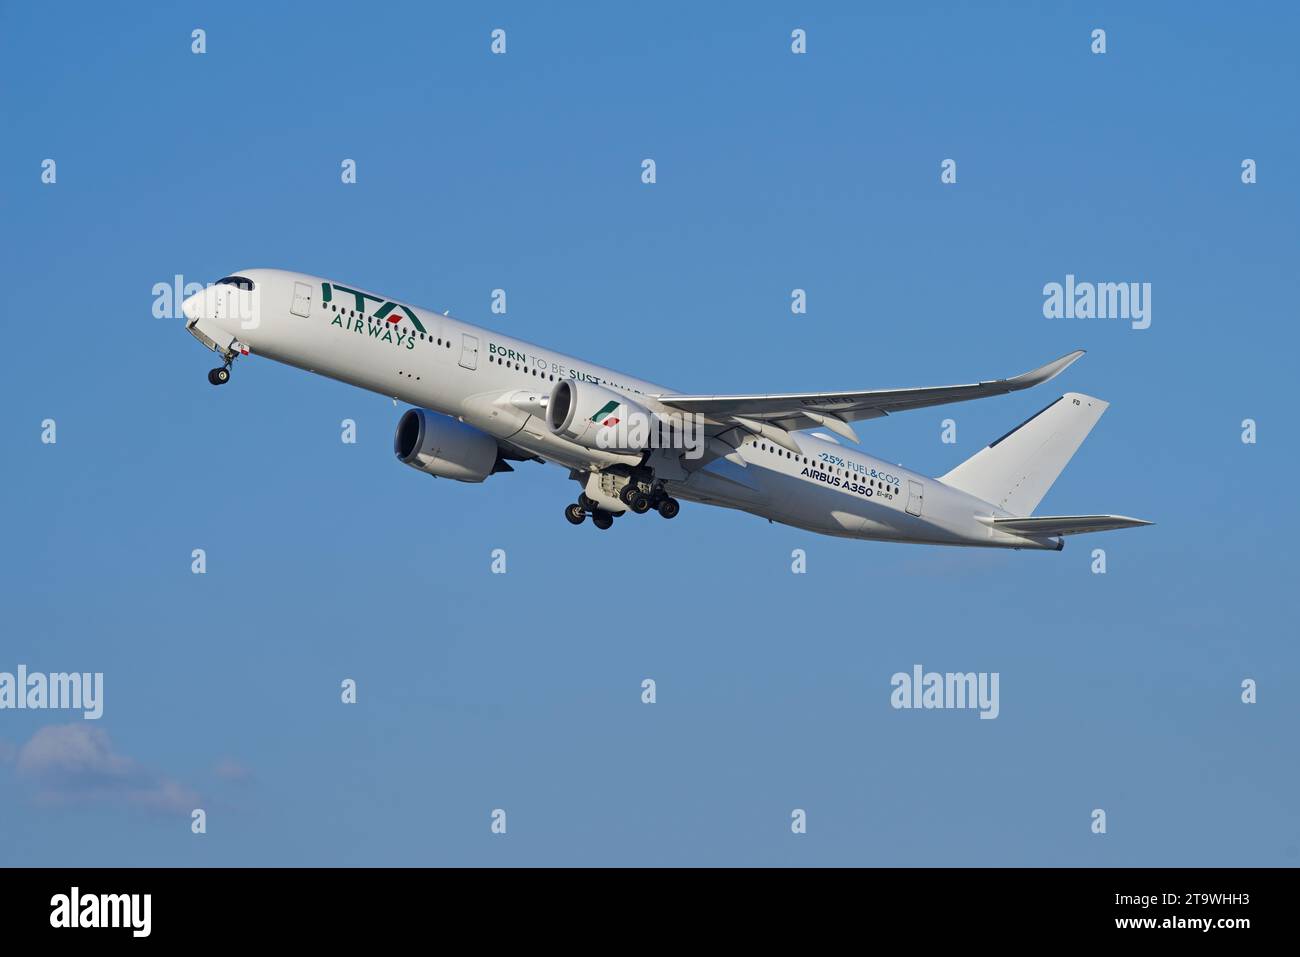 ITA Airways Airbus A350, 'Born to be Sustainable' livery, shown leaving from LAX, Los Angeles International Airport. Stock Photo